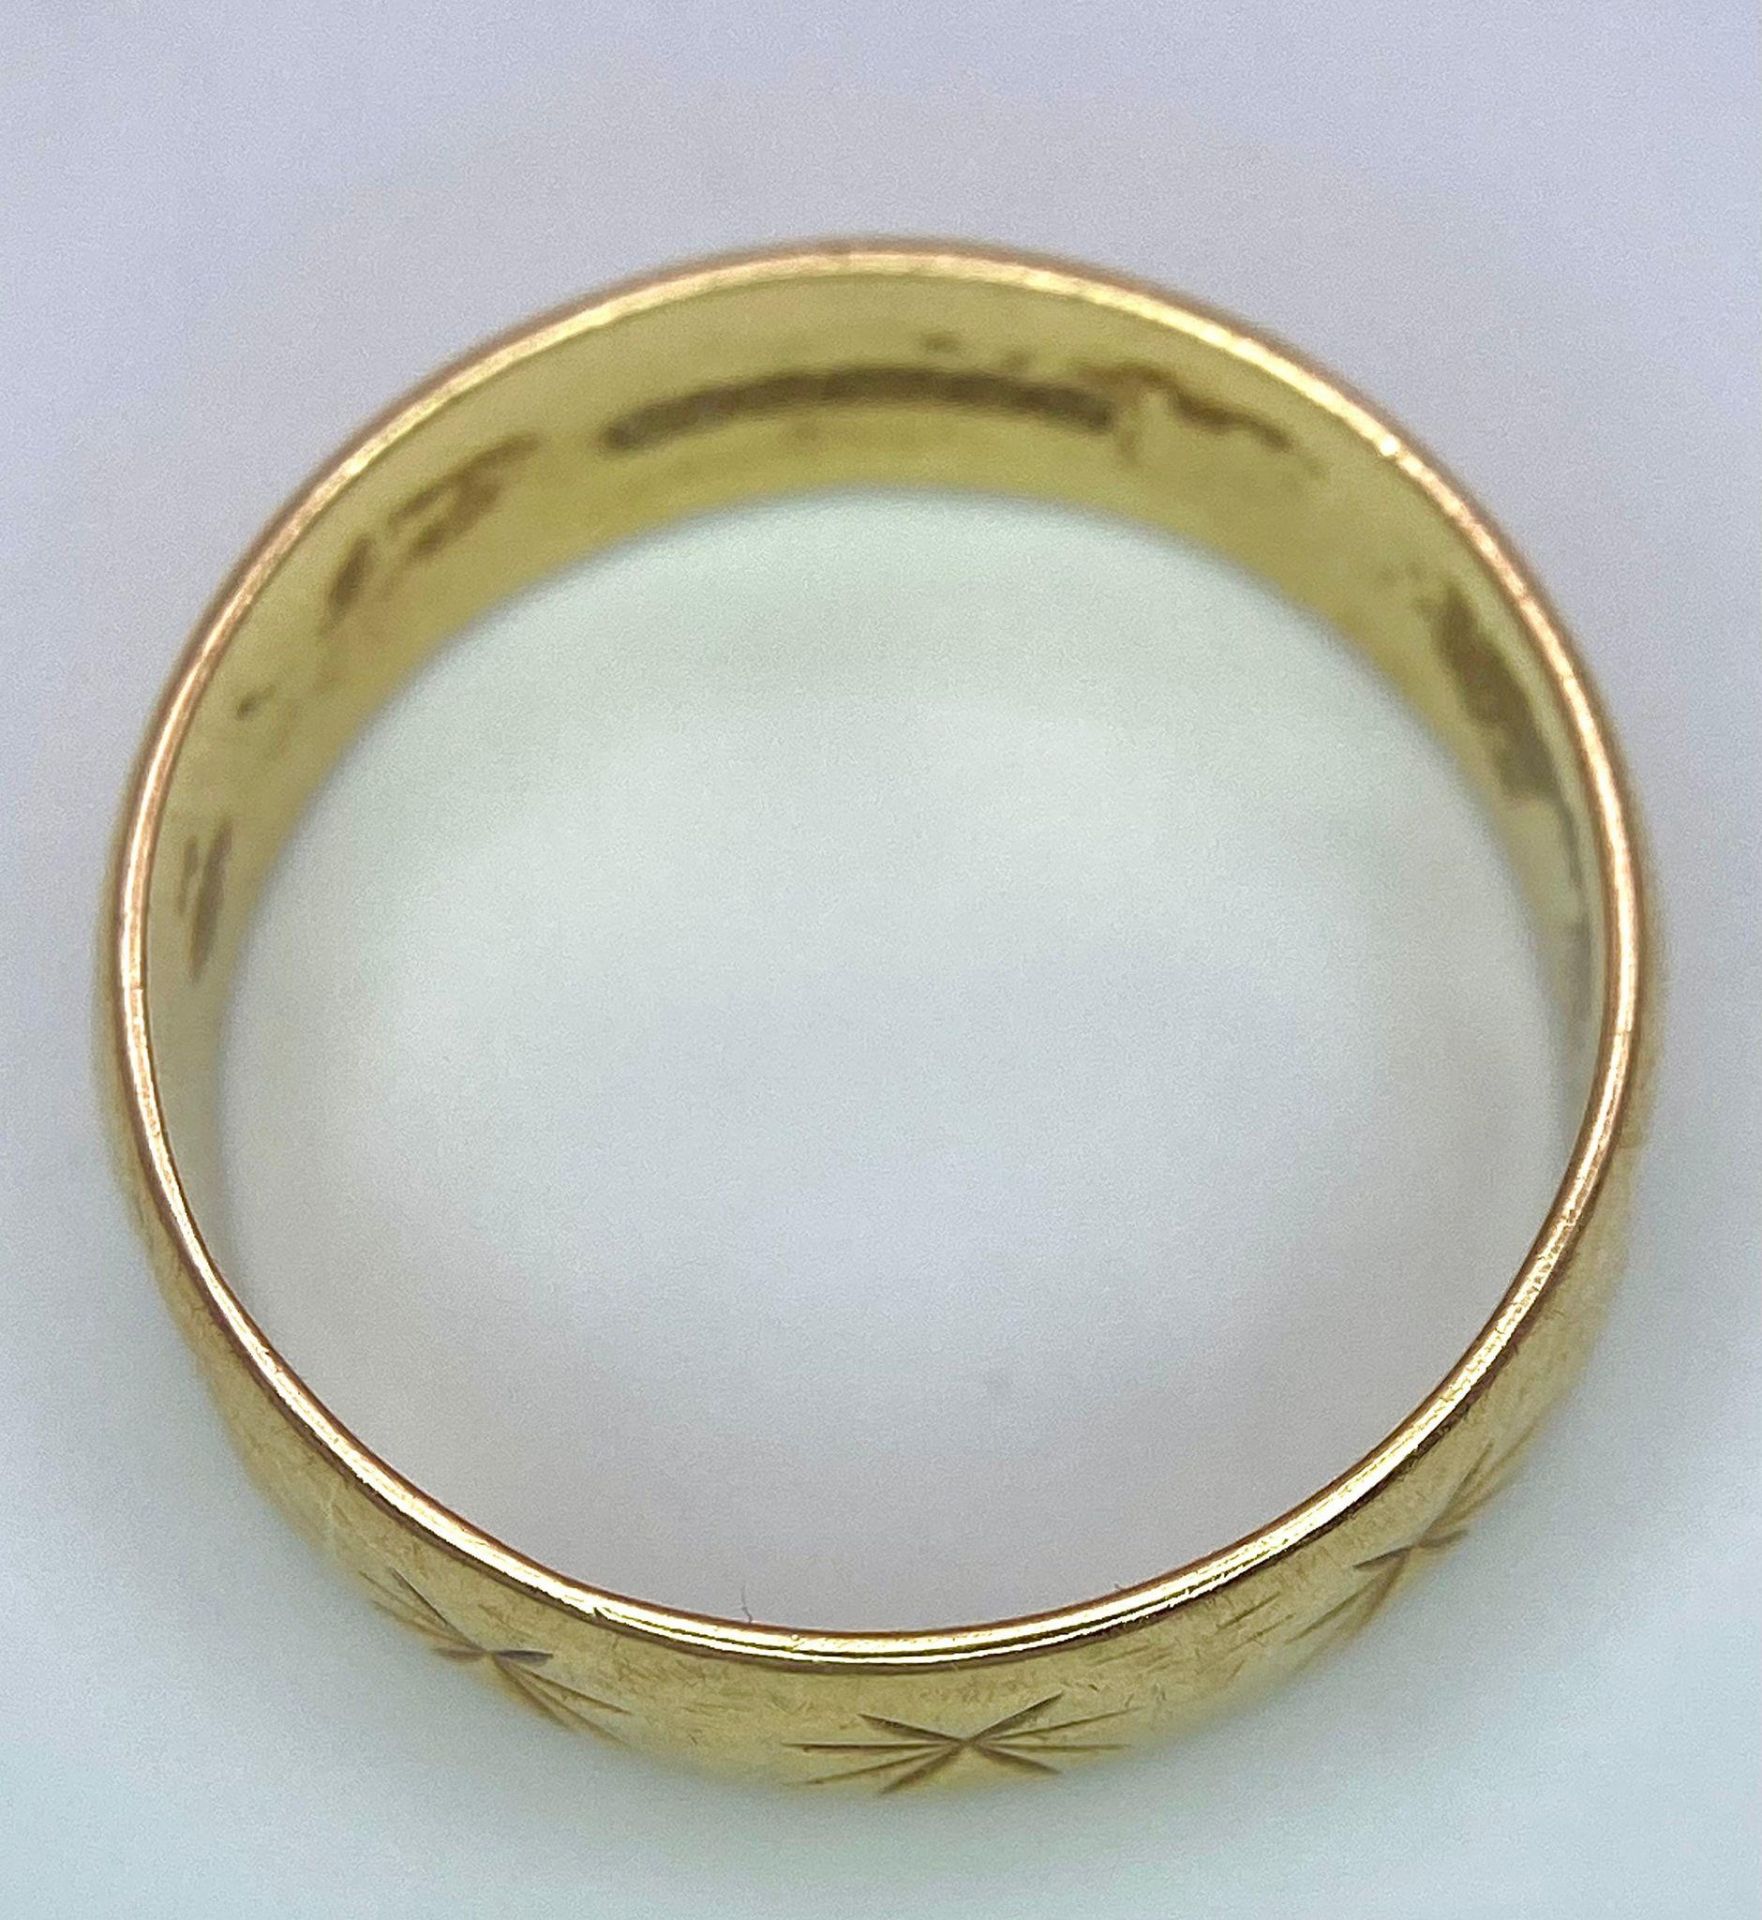 A Vintage 9K Yellow Gold Band Ring with Star Decoration. 5mm width. Size M. 2.8g weight. - Bild 5 aus 6